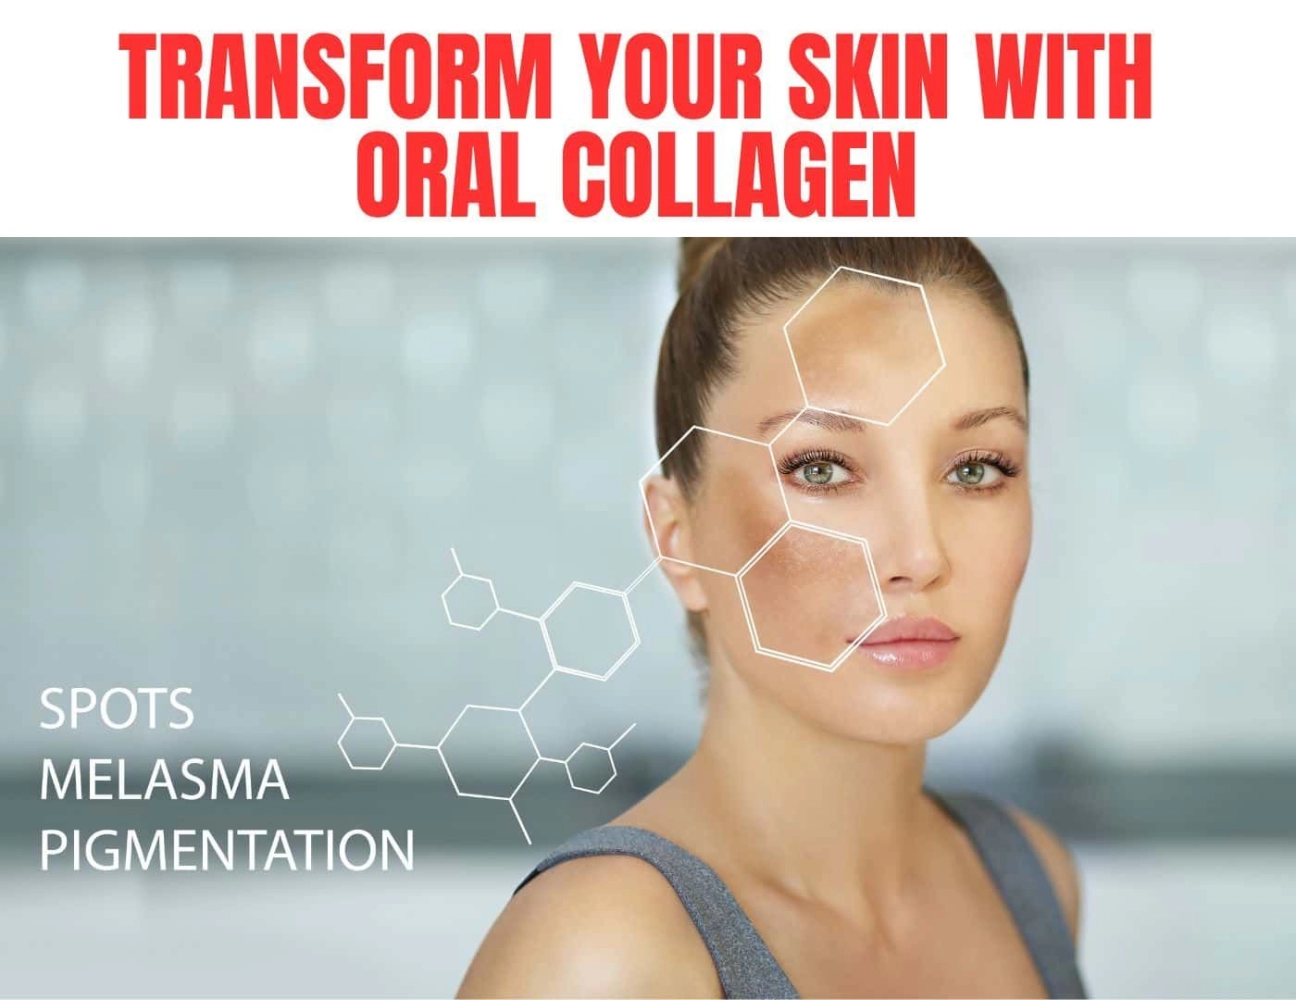 Singapore's Glow Revolution: Transform Your Skin with Oral Collagen and Say Goodbye to Hyperpigmentation/Dark Spot